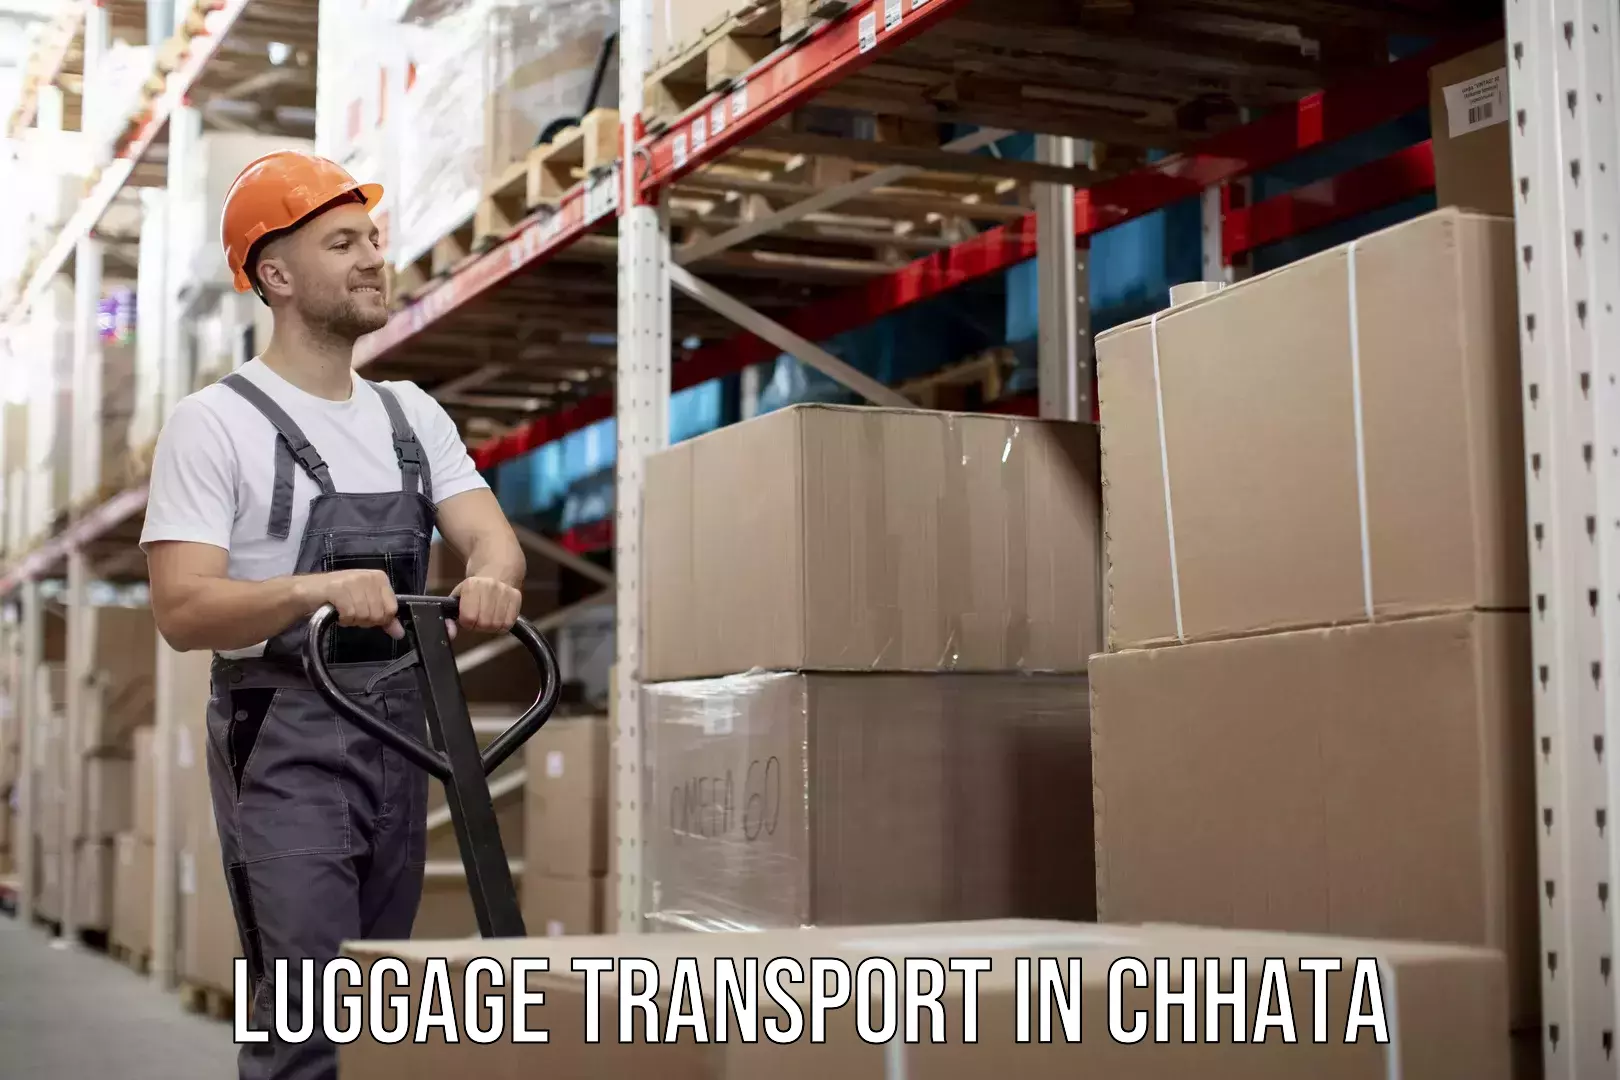 Luggage shipping discounts in Chhata